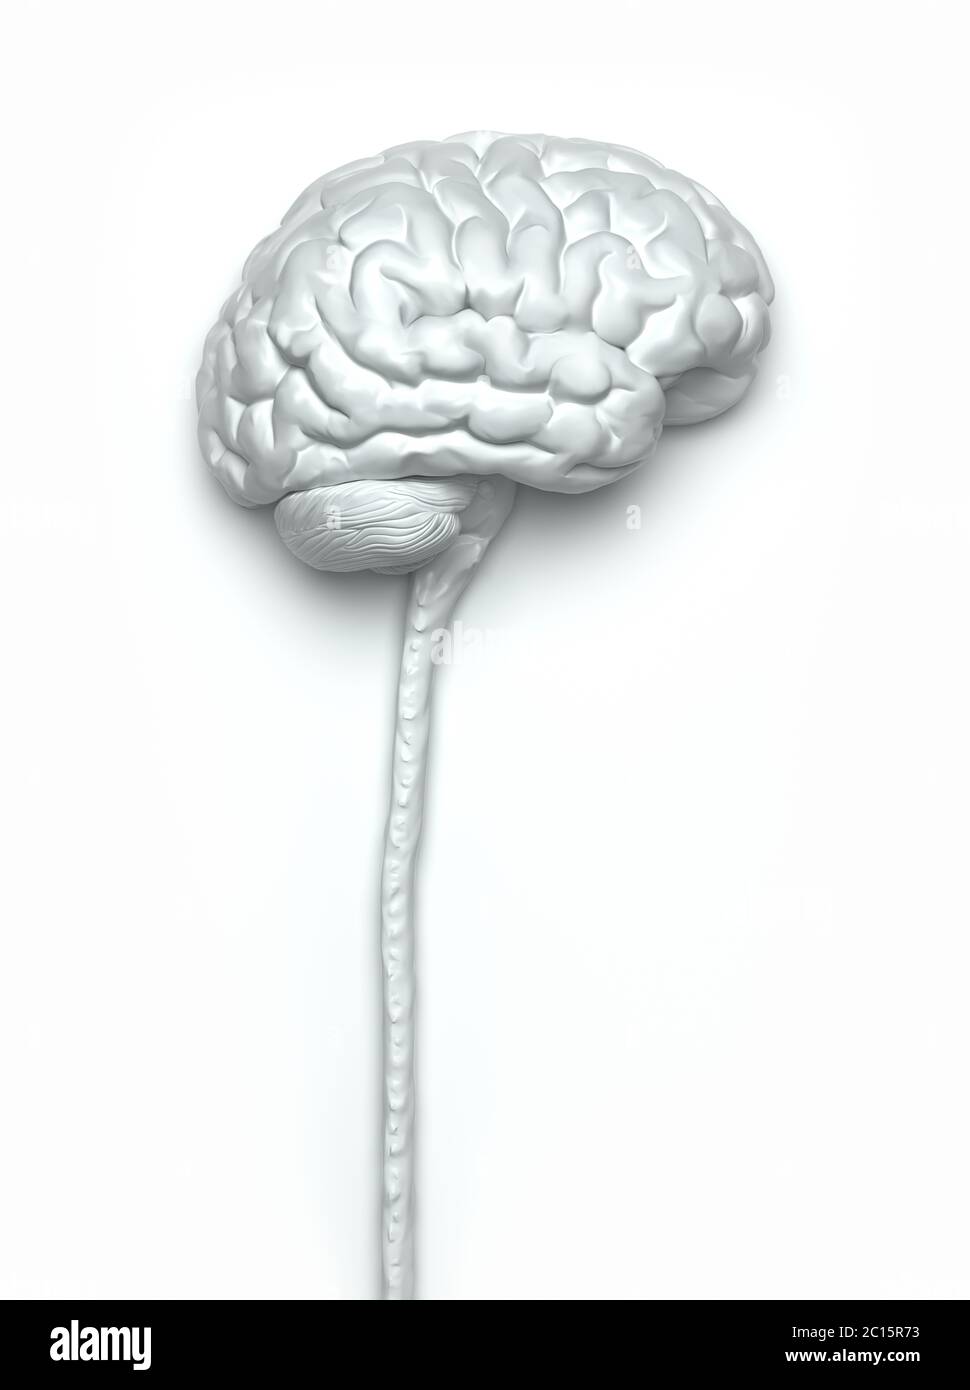 Central nervous system. Brain and spinal cord with clipping path included. Conceptual brain 3D illustration. Stock Photo